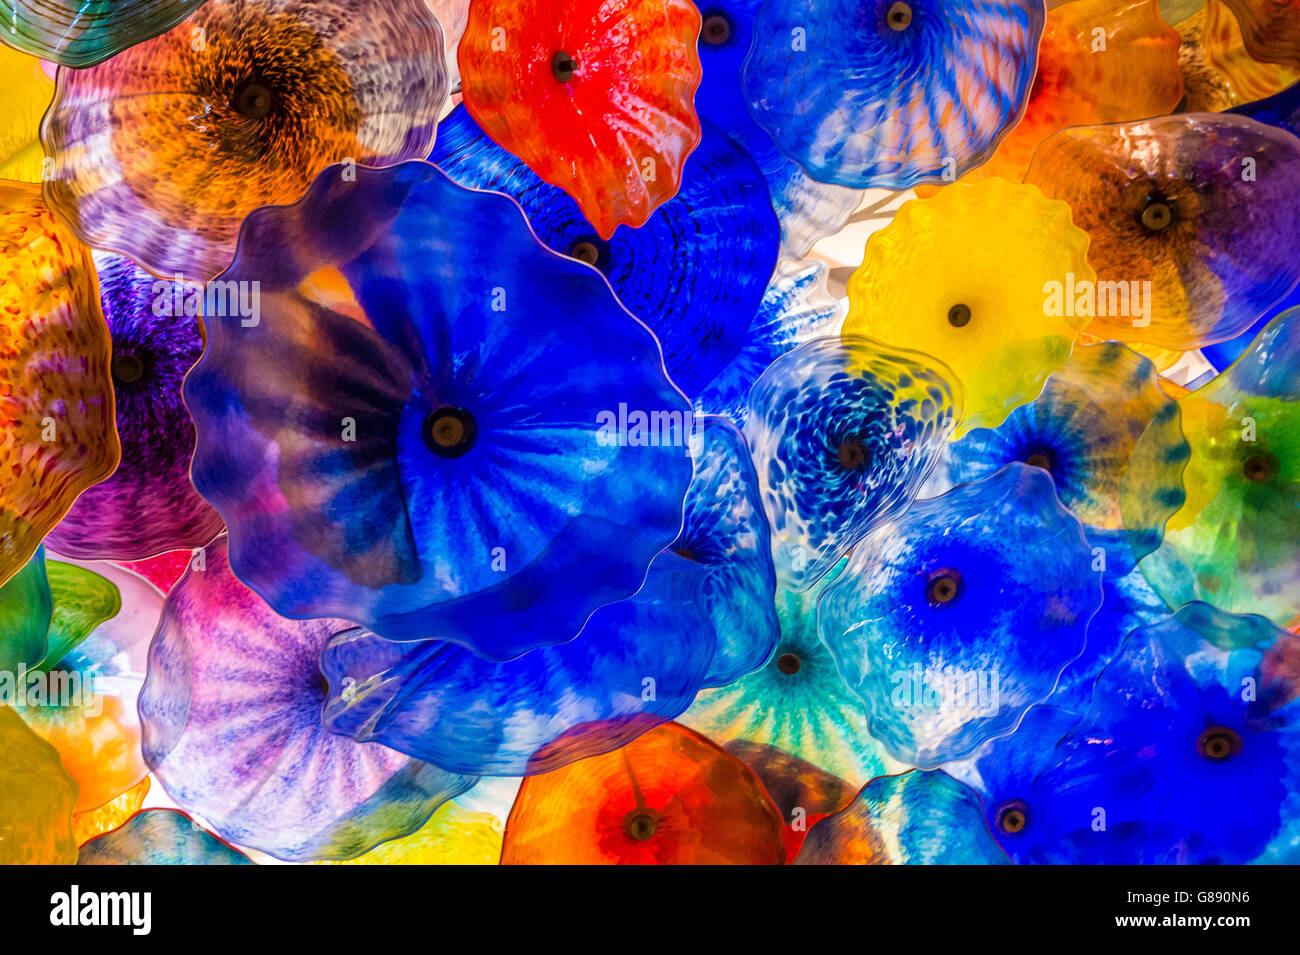 The Hand Blown Glass Flower Ceiling At The Bellagio Hotel In